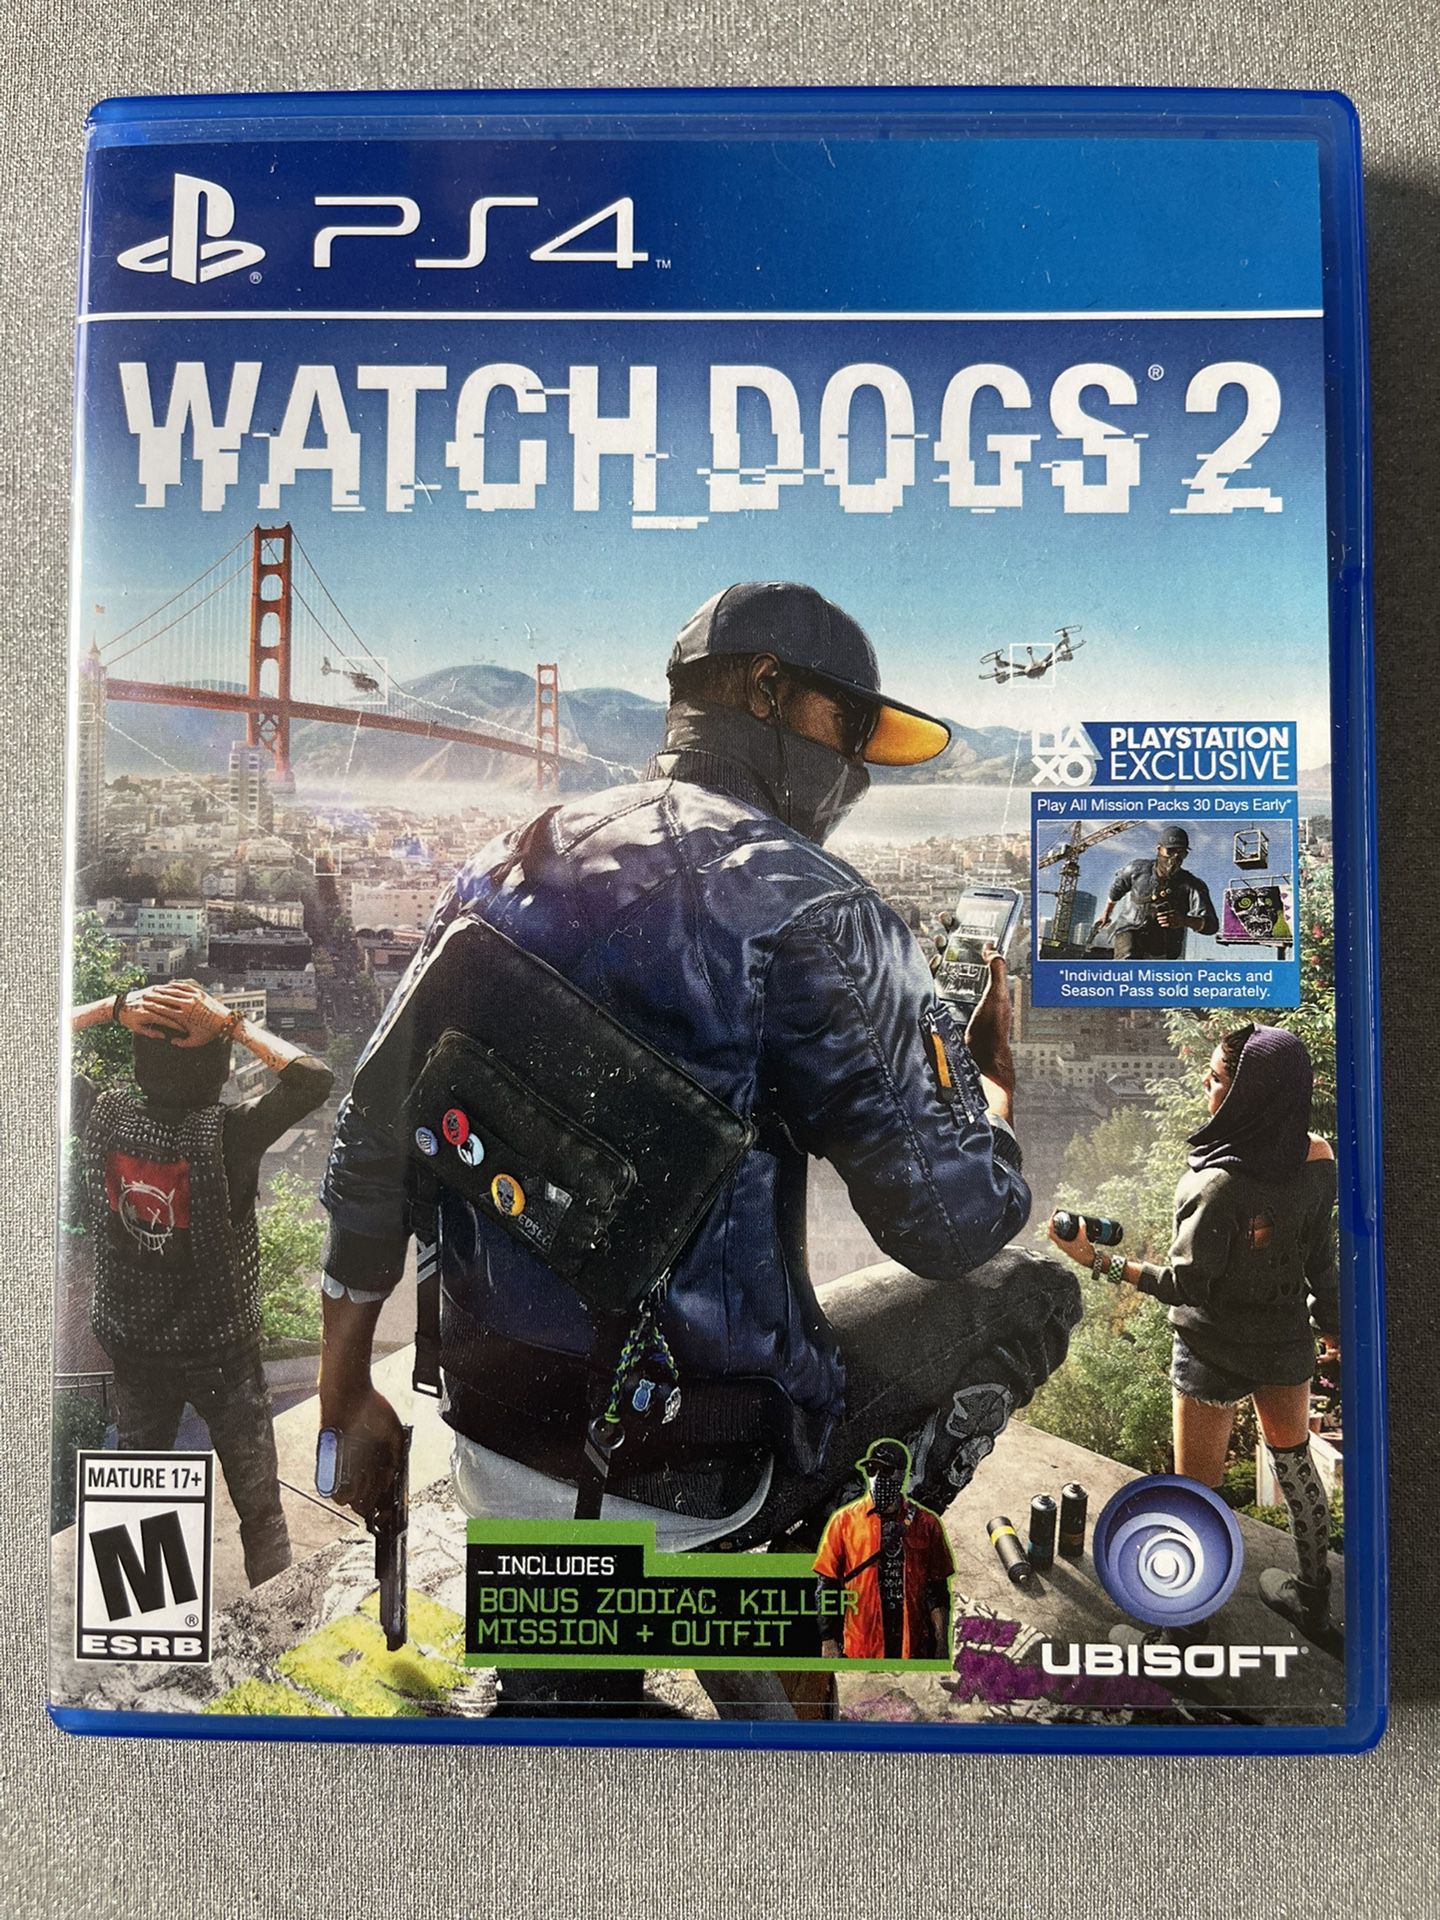 Watch Dogs 2 - PS4 Game